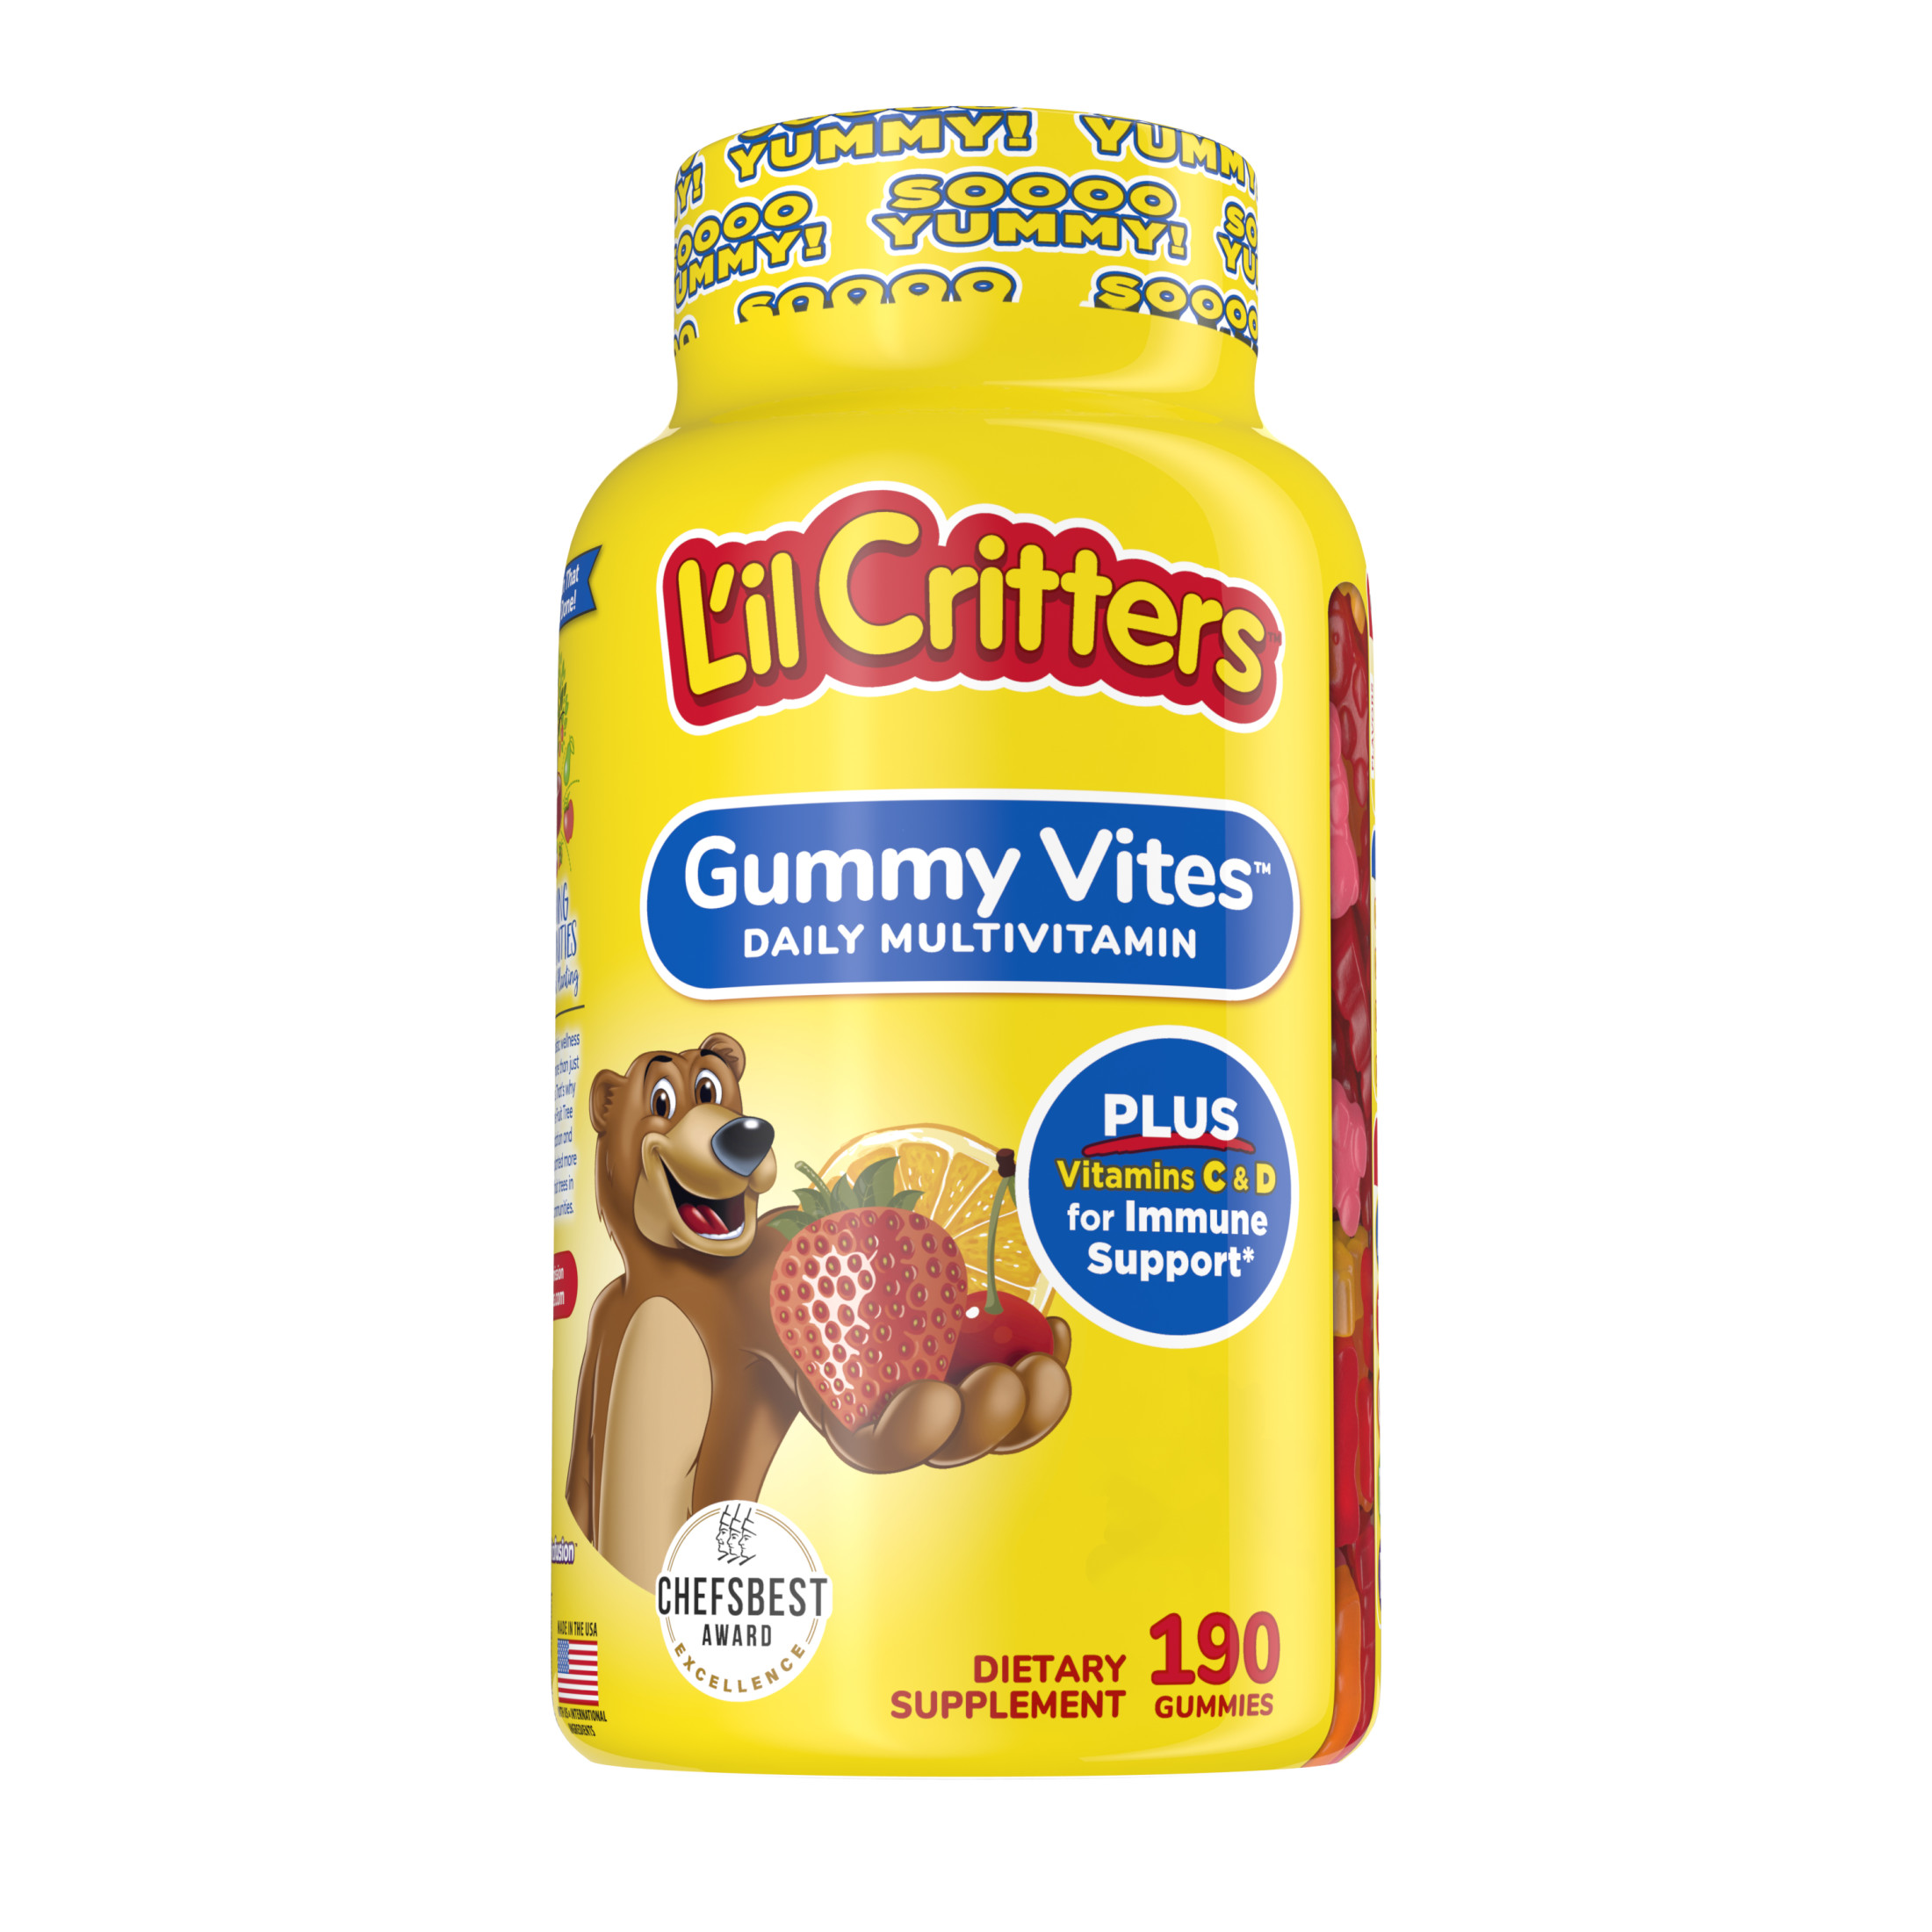 L’il Critters Gummy Vites Daily Gummy Multivitamin for Kids, Vitamin C, D3 for Immune Support Cherry, Strawberry, Orange, Pineapple and Blueberry Flavors, 190 Gummies - image 1 of 9